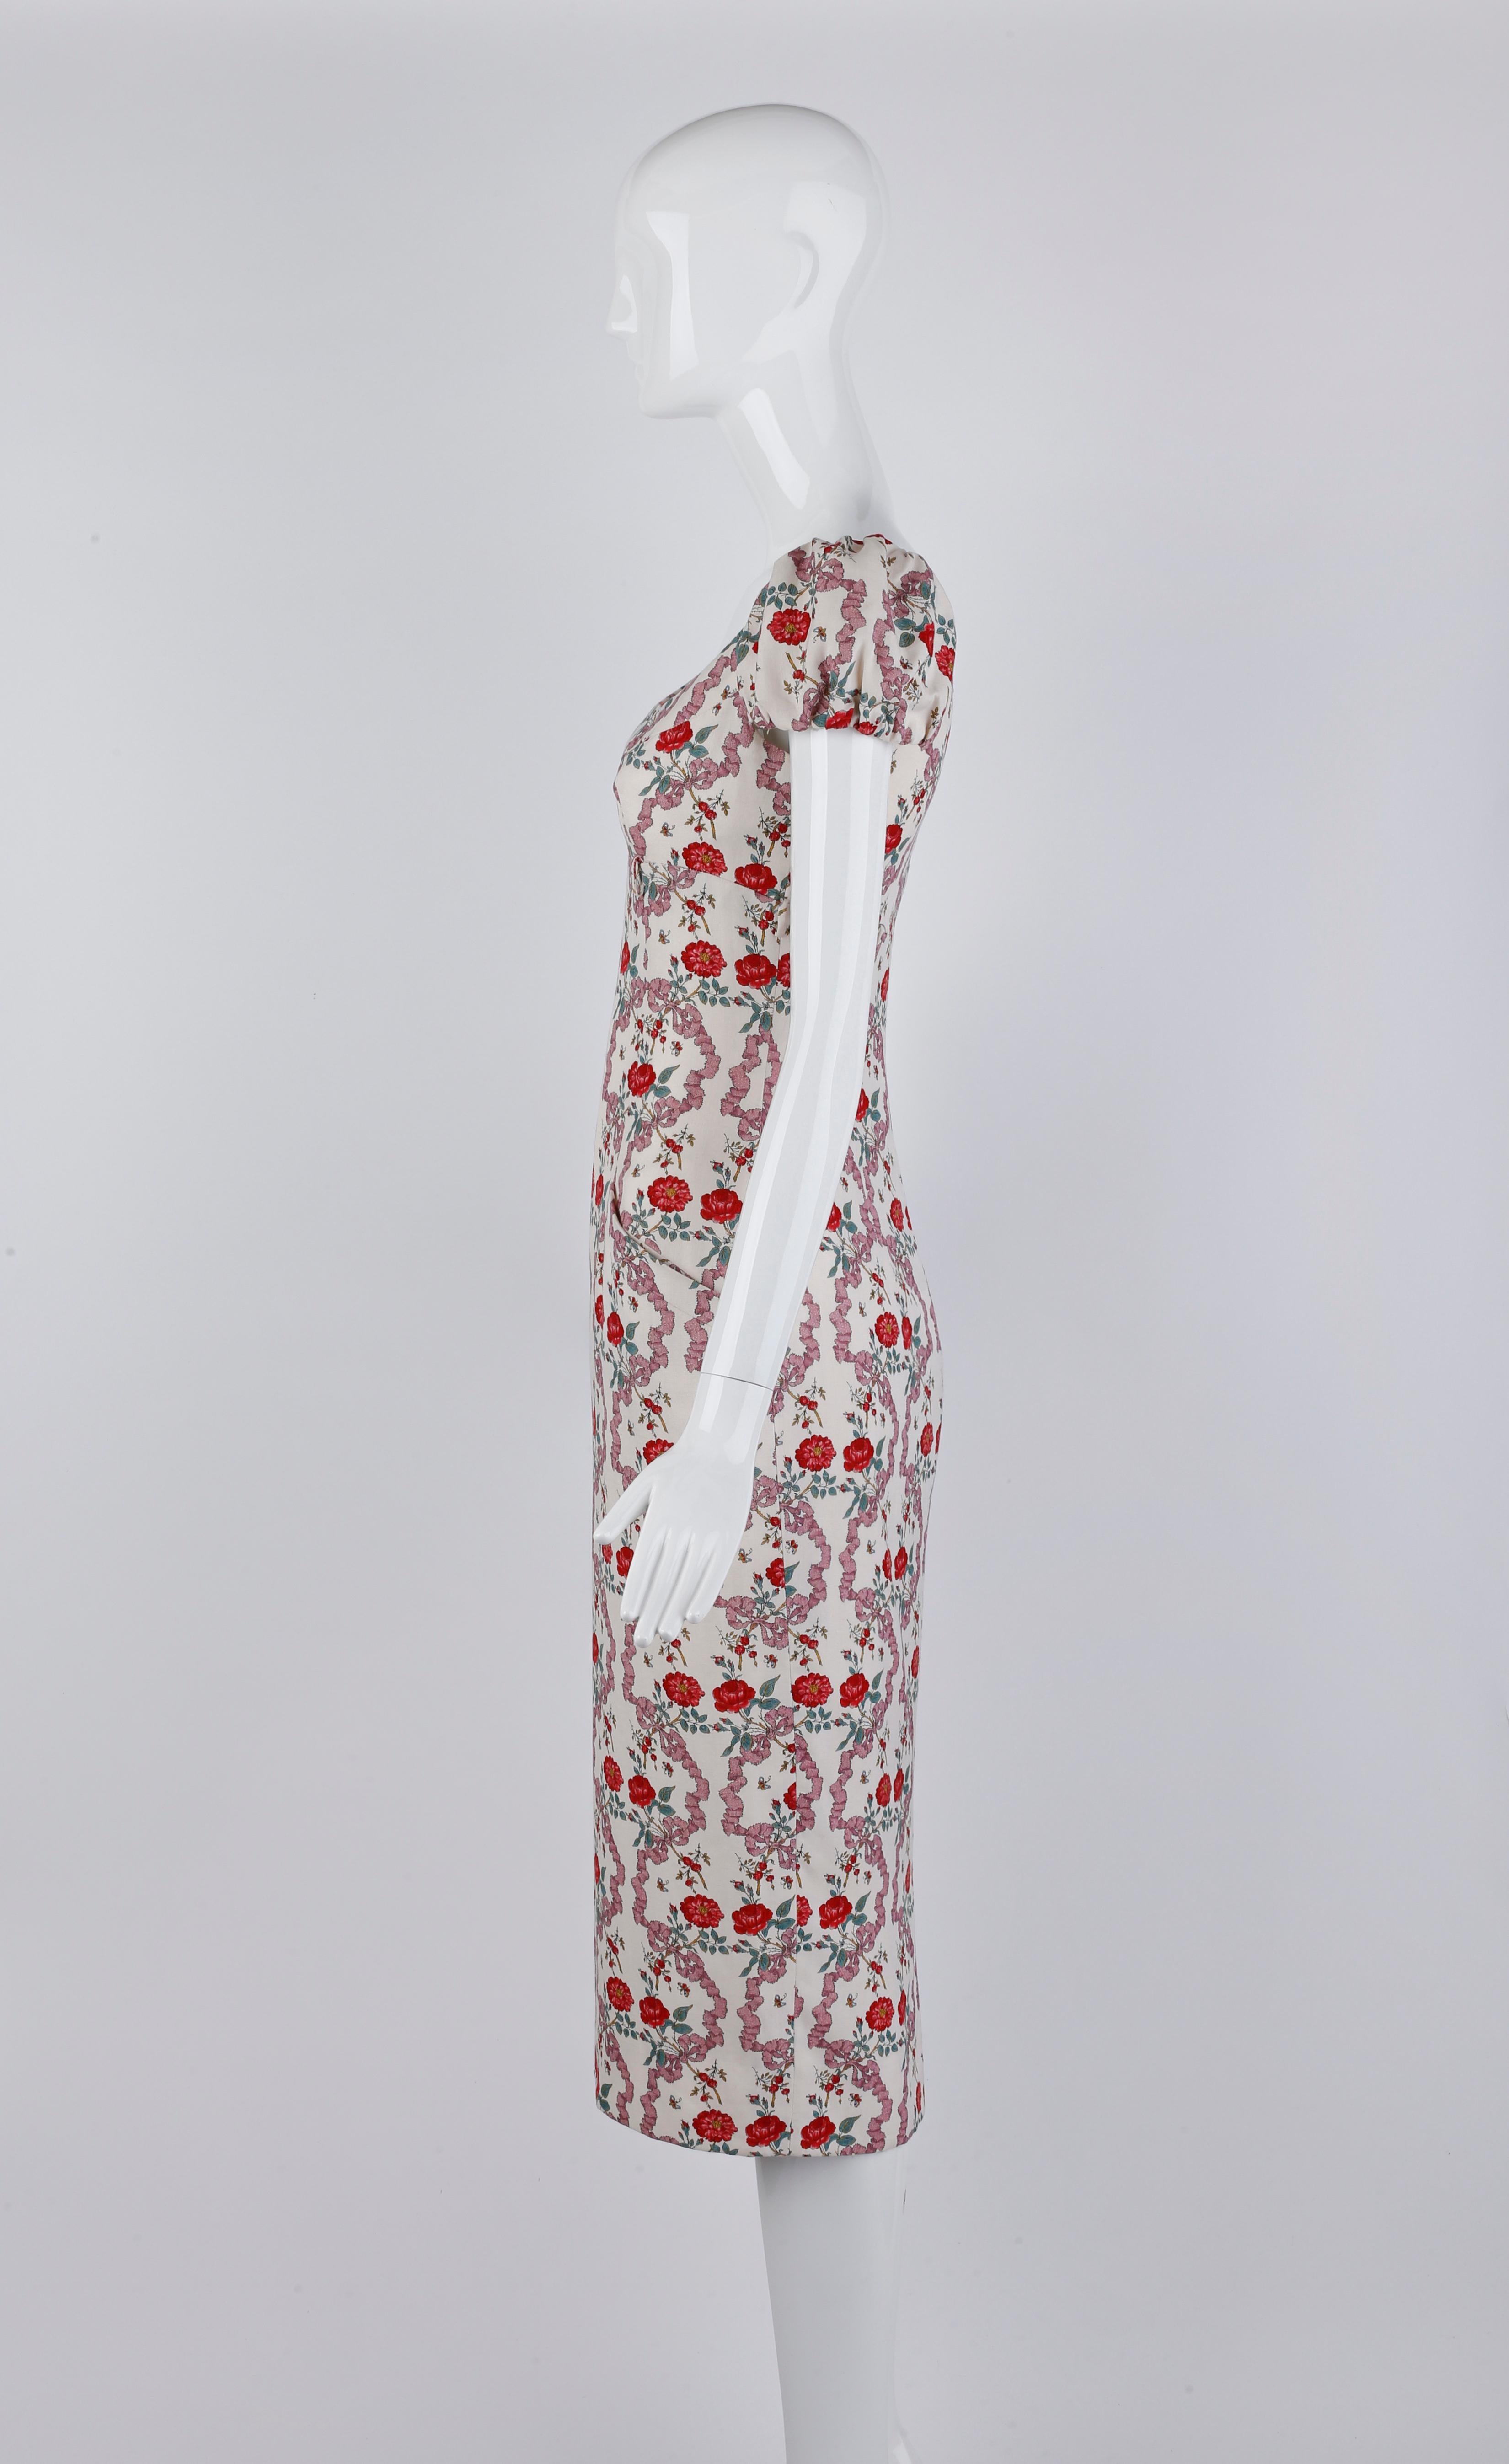 Givenchy Couture John Galliano S/S 1997 Bouquet Floral Ribbon Print Midi Dress For Sale 3